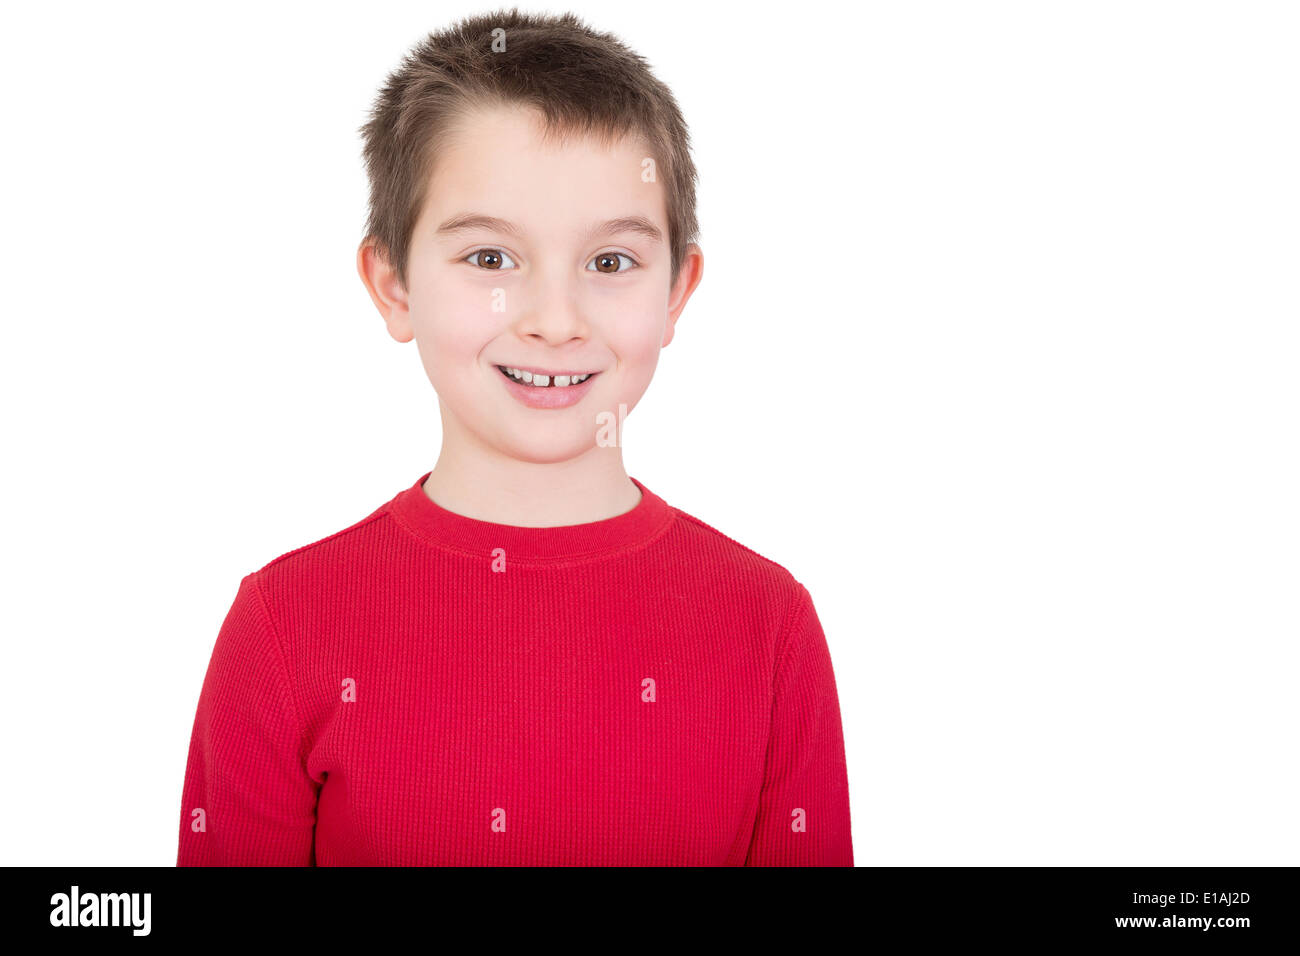 Young boy in a red t-shirt with a happy grin and alert expression, isolated on white Stock Photo